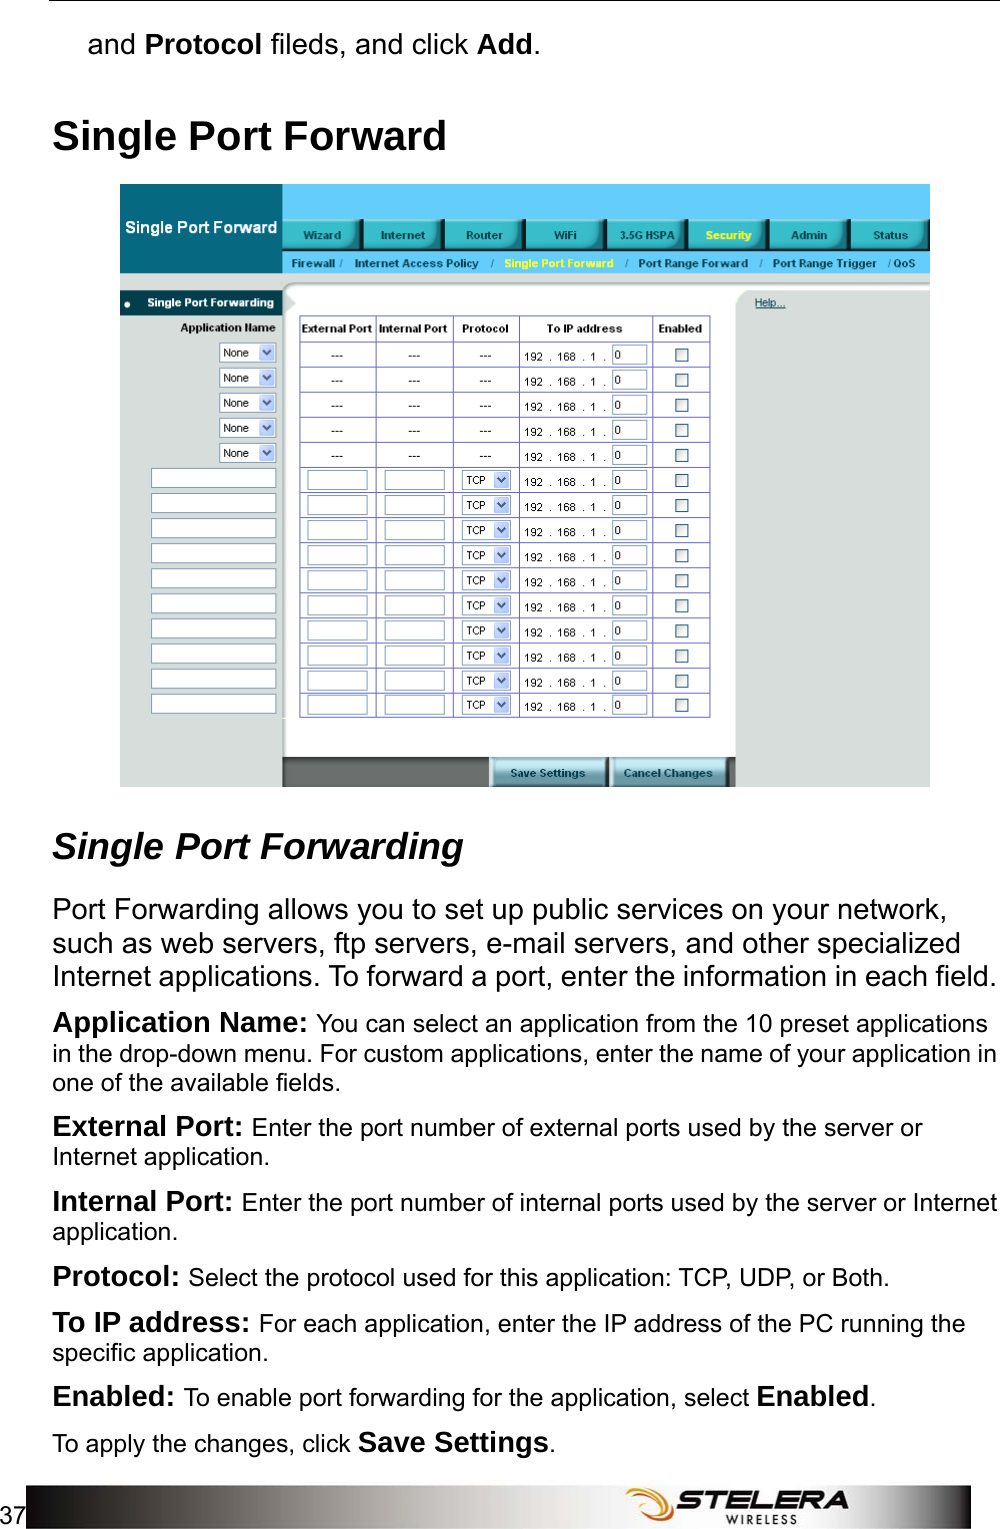  Security Setup 37  and Protocol fileds, and click Add. Single Port Forward  Single Port Forwarding Port Forwarding allows you to set up public services on your network, such as web servers, ftp servers, e-mail servers, and other specialized Internet applications. To forward a port, enter the information in each field. Application Name: You can select an application from the 10 preset applications in the drop-down menu. For custom applications, enter the name of your application in one of the available fields. External Port: Enter the port number of external ports used by the server or Internet application. Internal Port: Enter the port number of internal ports used by the server or Internet application.  Protocol: Select the protocol used for this application: TCP, UDP, or Both. To IP address: For each application, enter the IP address of the PC running the specific application. Enabled: To enable port forwarding for the application, select Enabled. To apply the changes, click Save Settings. 